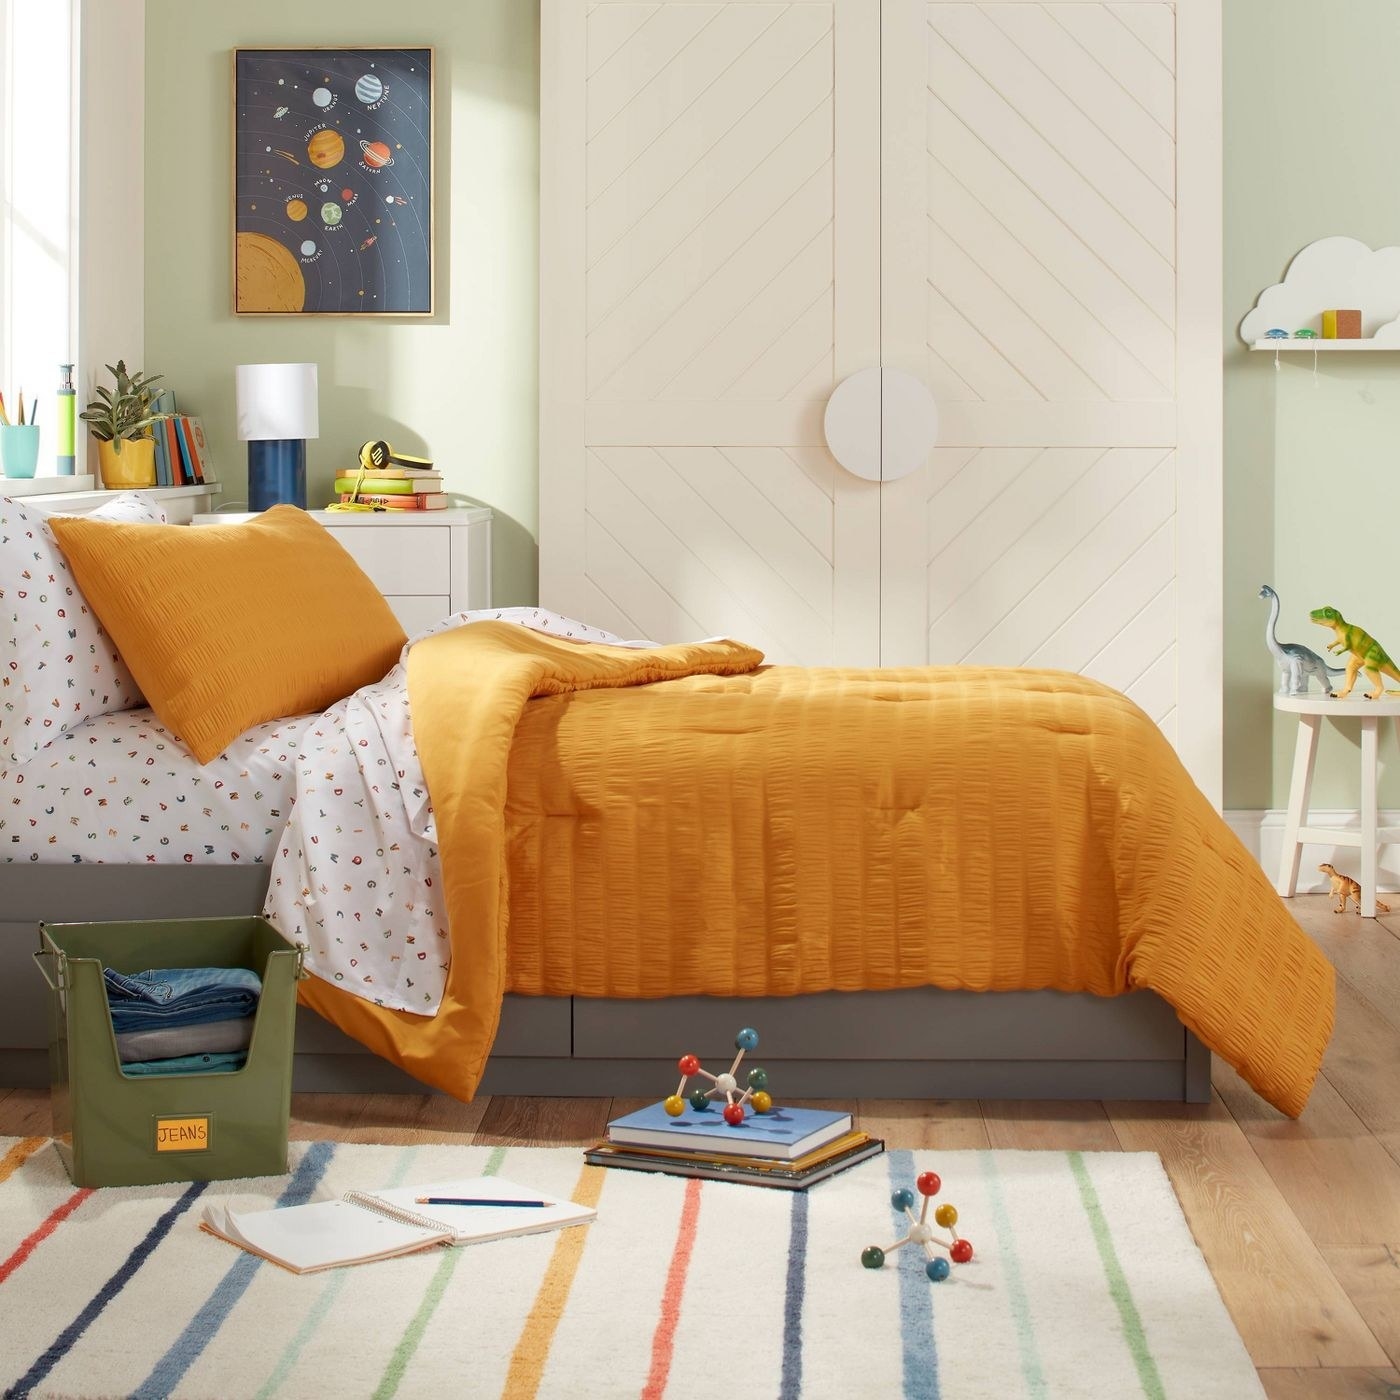 A bed with a mustard yellow duvet